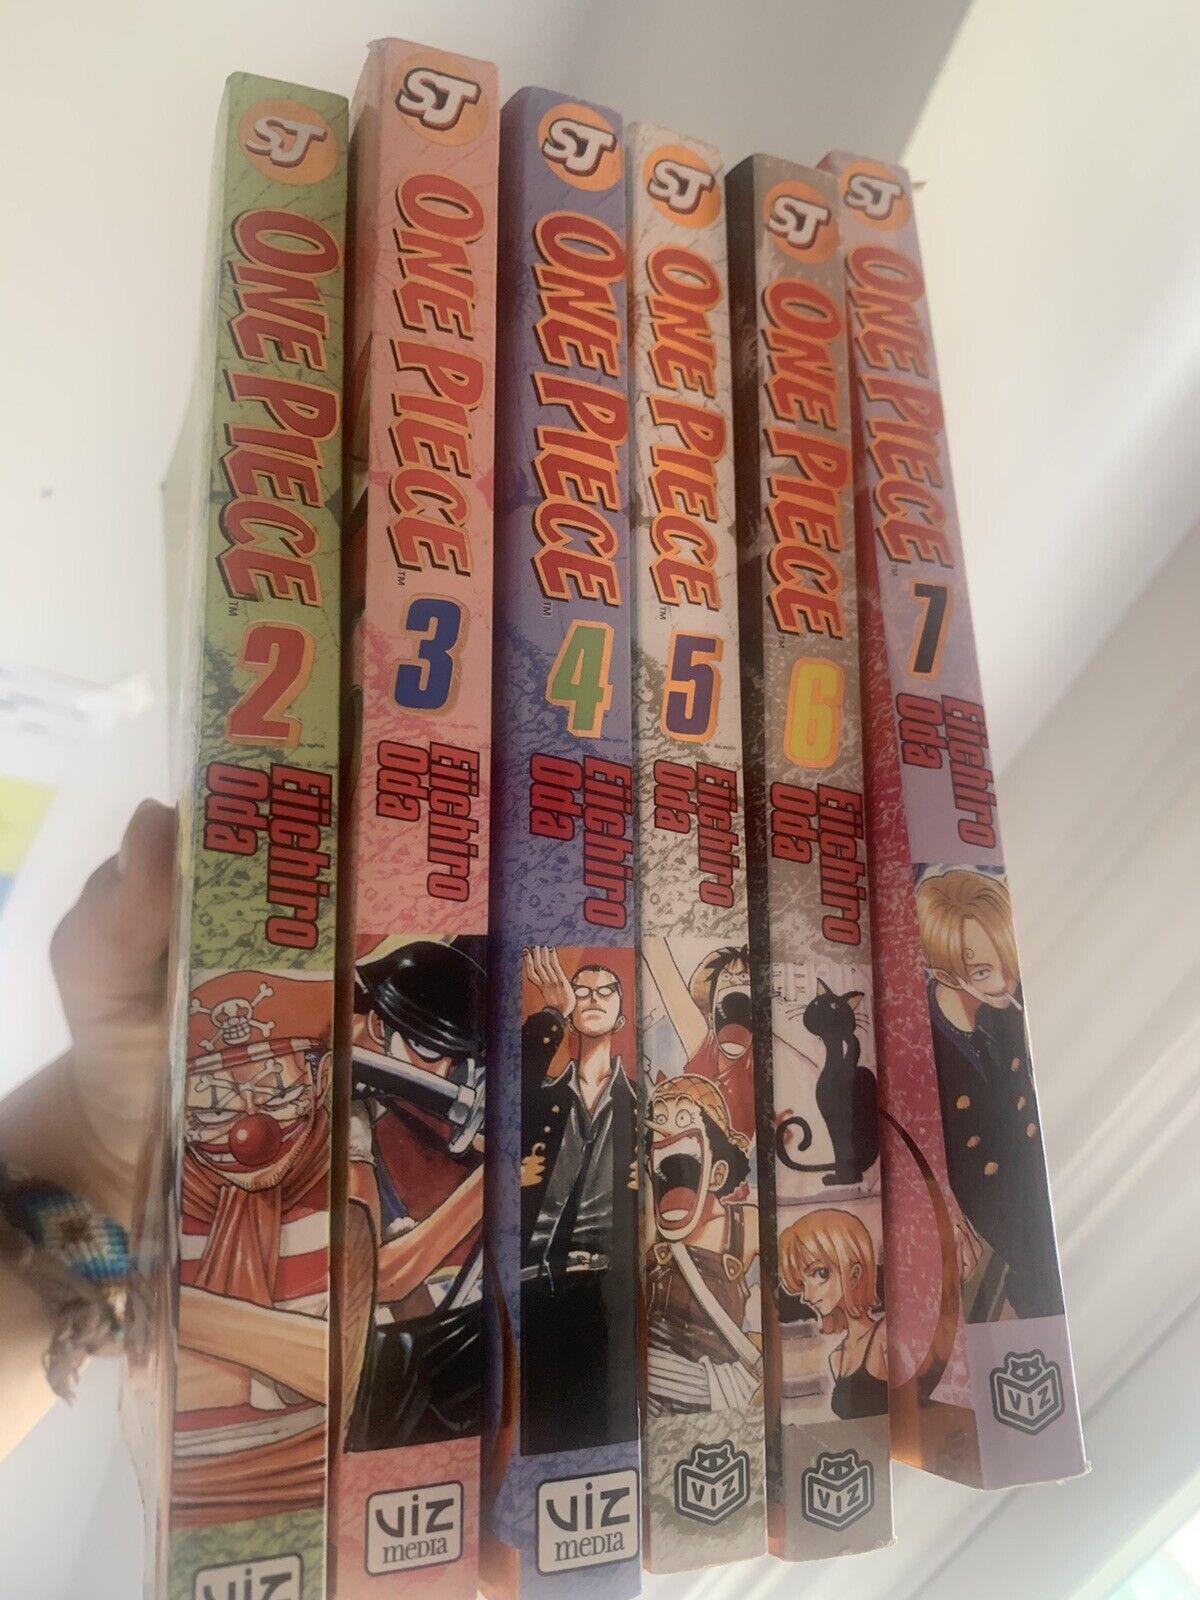 One Piece Gold Foil Manga Edition Set Series Volumes 2-7 Cover Print